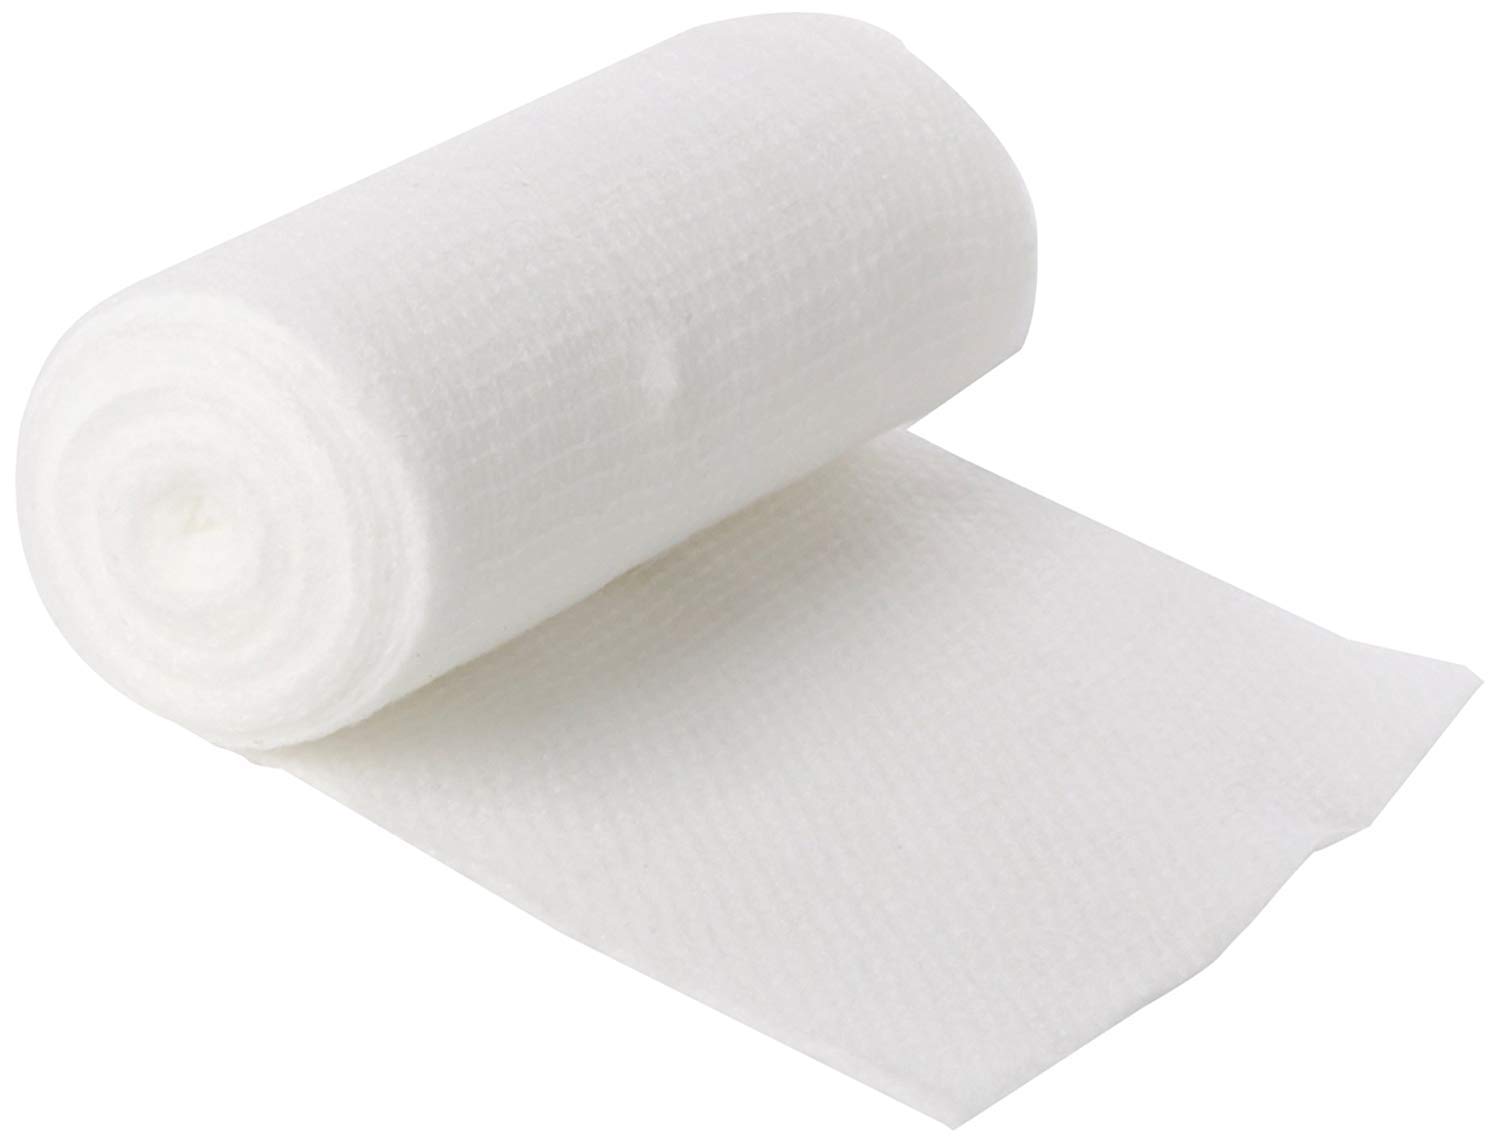 QMD Non-Sterile Conforming Bandage (Bag of 12)